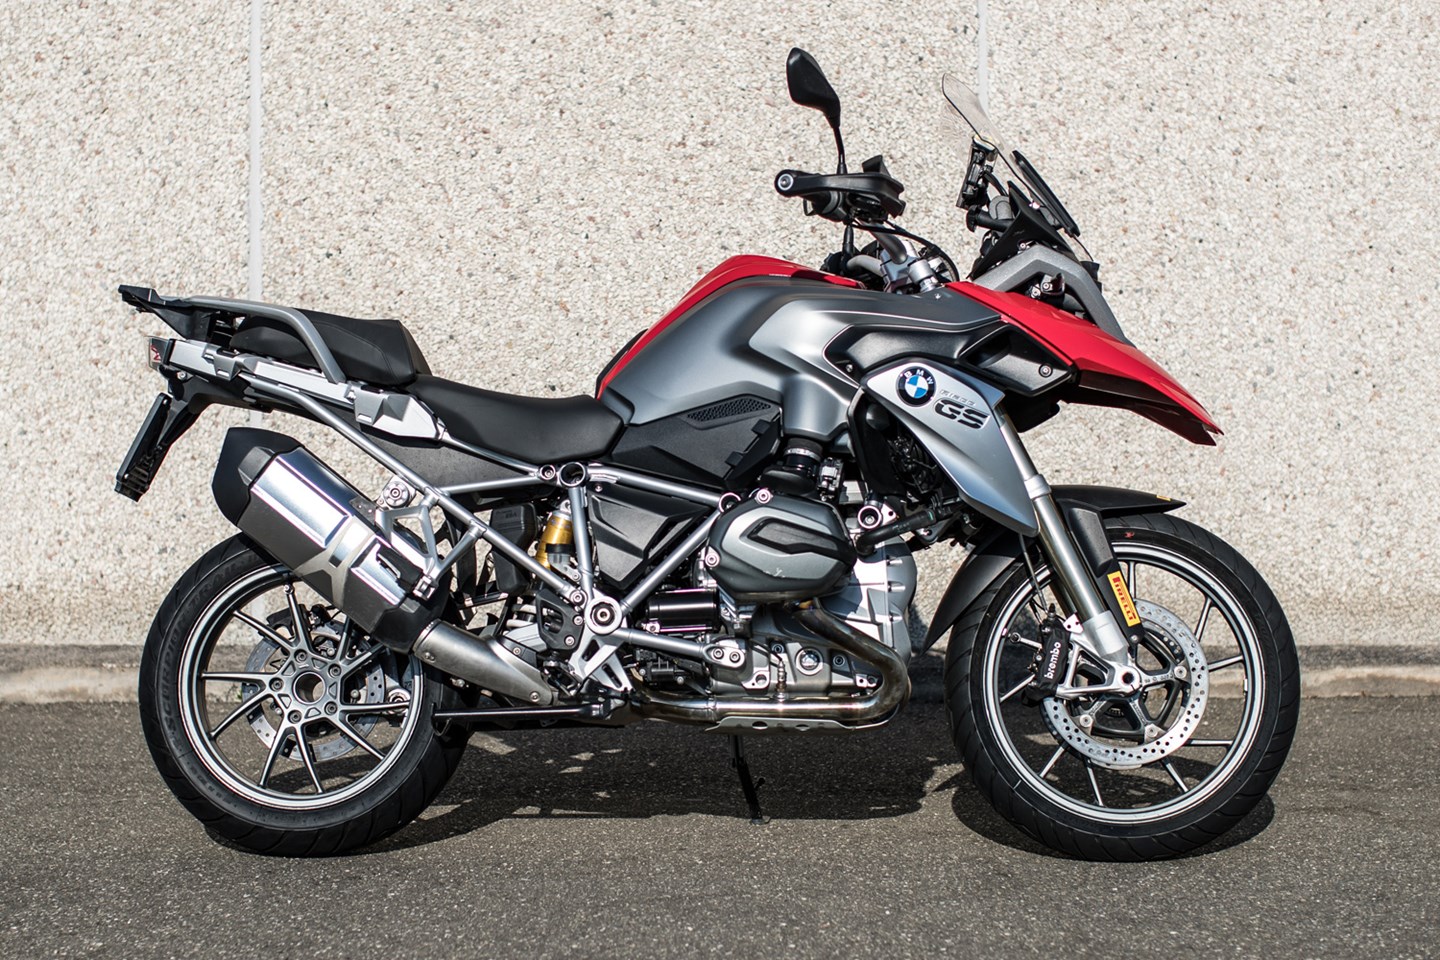 BMW R1200GS dual sport motorcycle